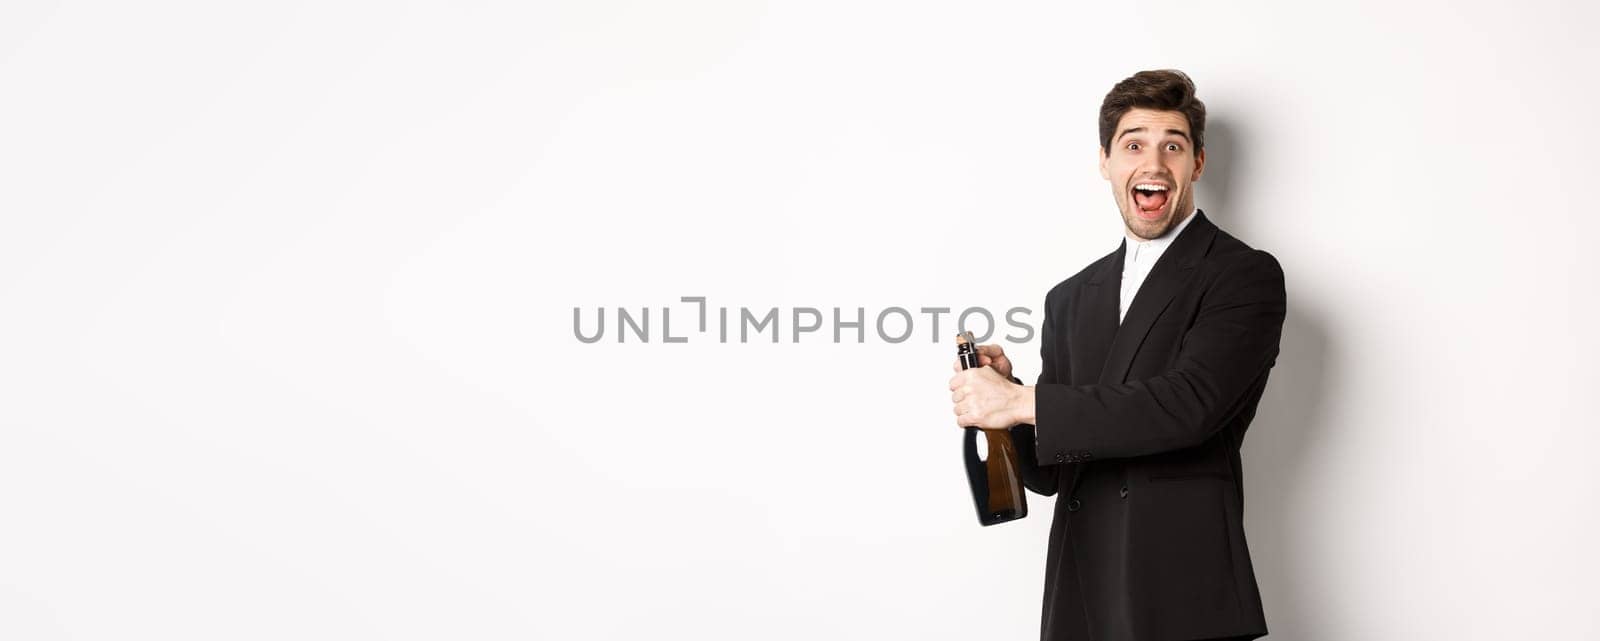 Portrait of attractive man in black suit, winking at camera and opening bottle of champagne, celebrating new year, standing against white background.